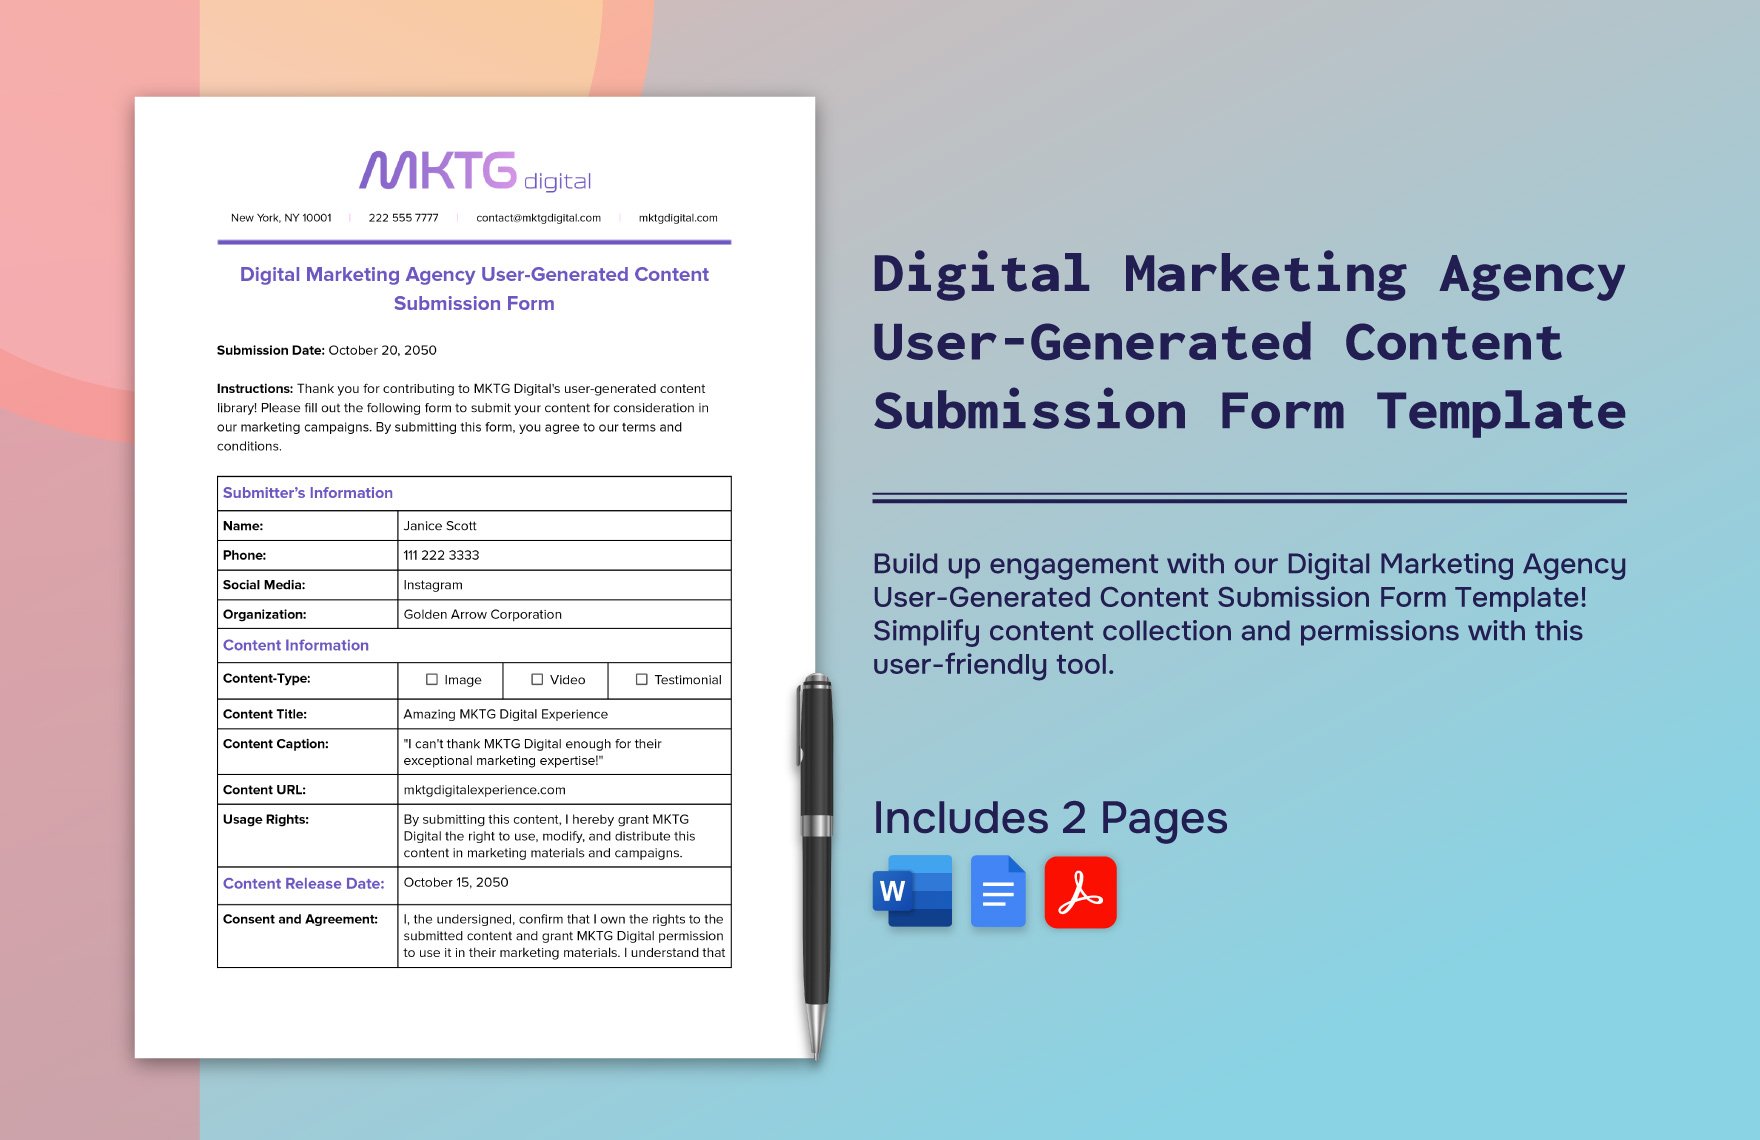 Digital Marketing Agency User-Generated Content Submission Form Template